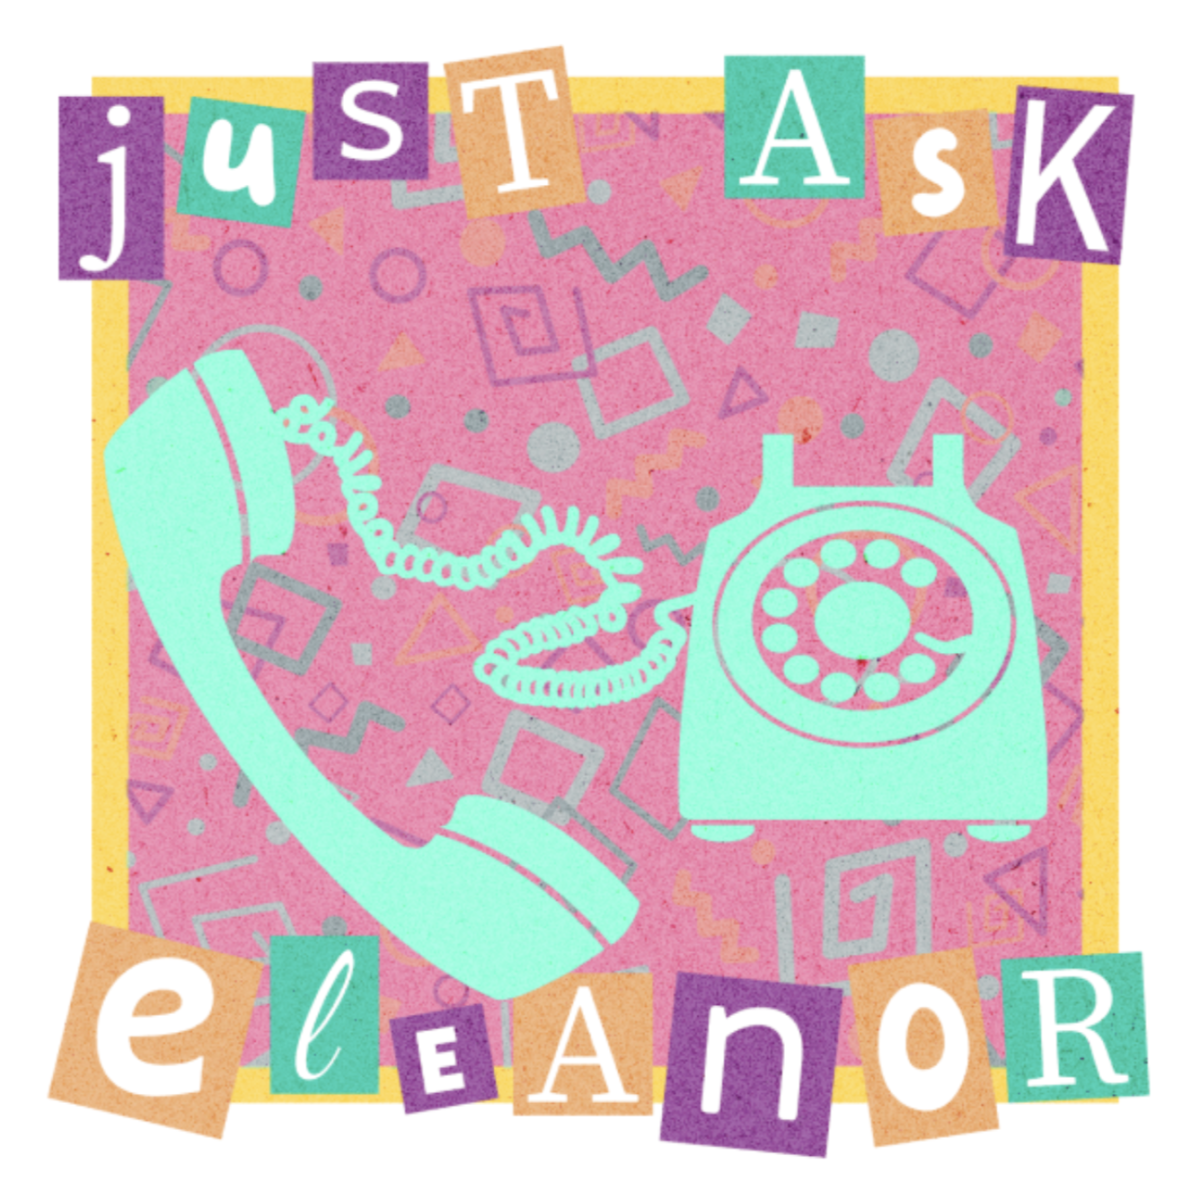 Just Ask Eleanor Podcast Cover. Design by Caitlin Morey.